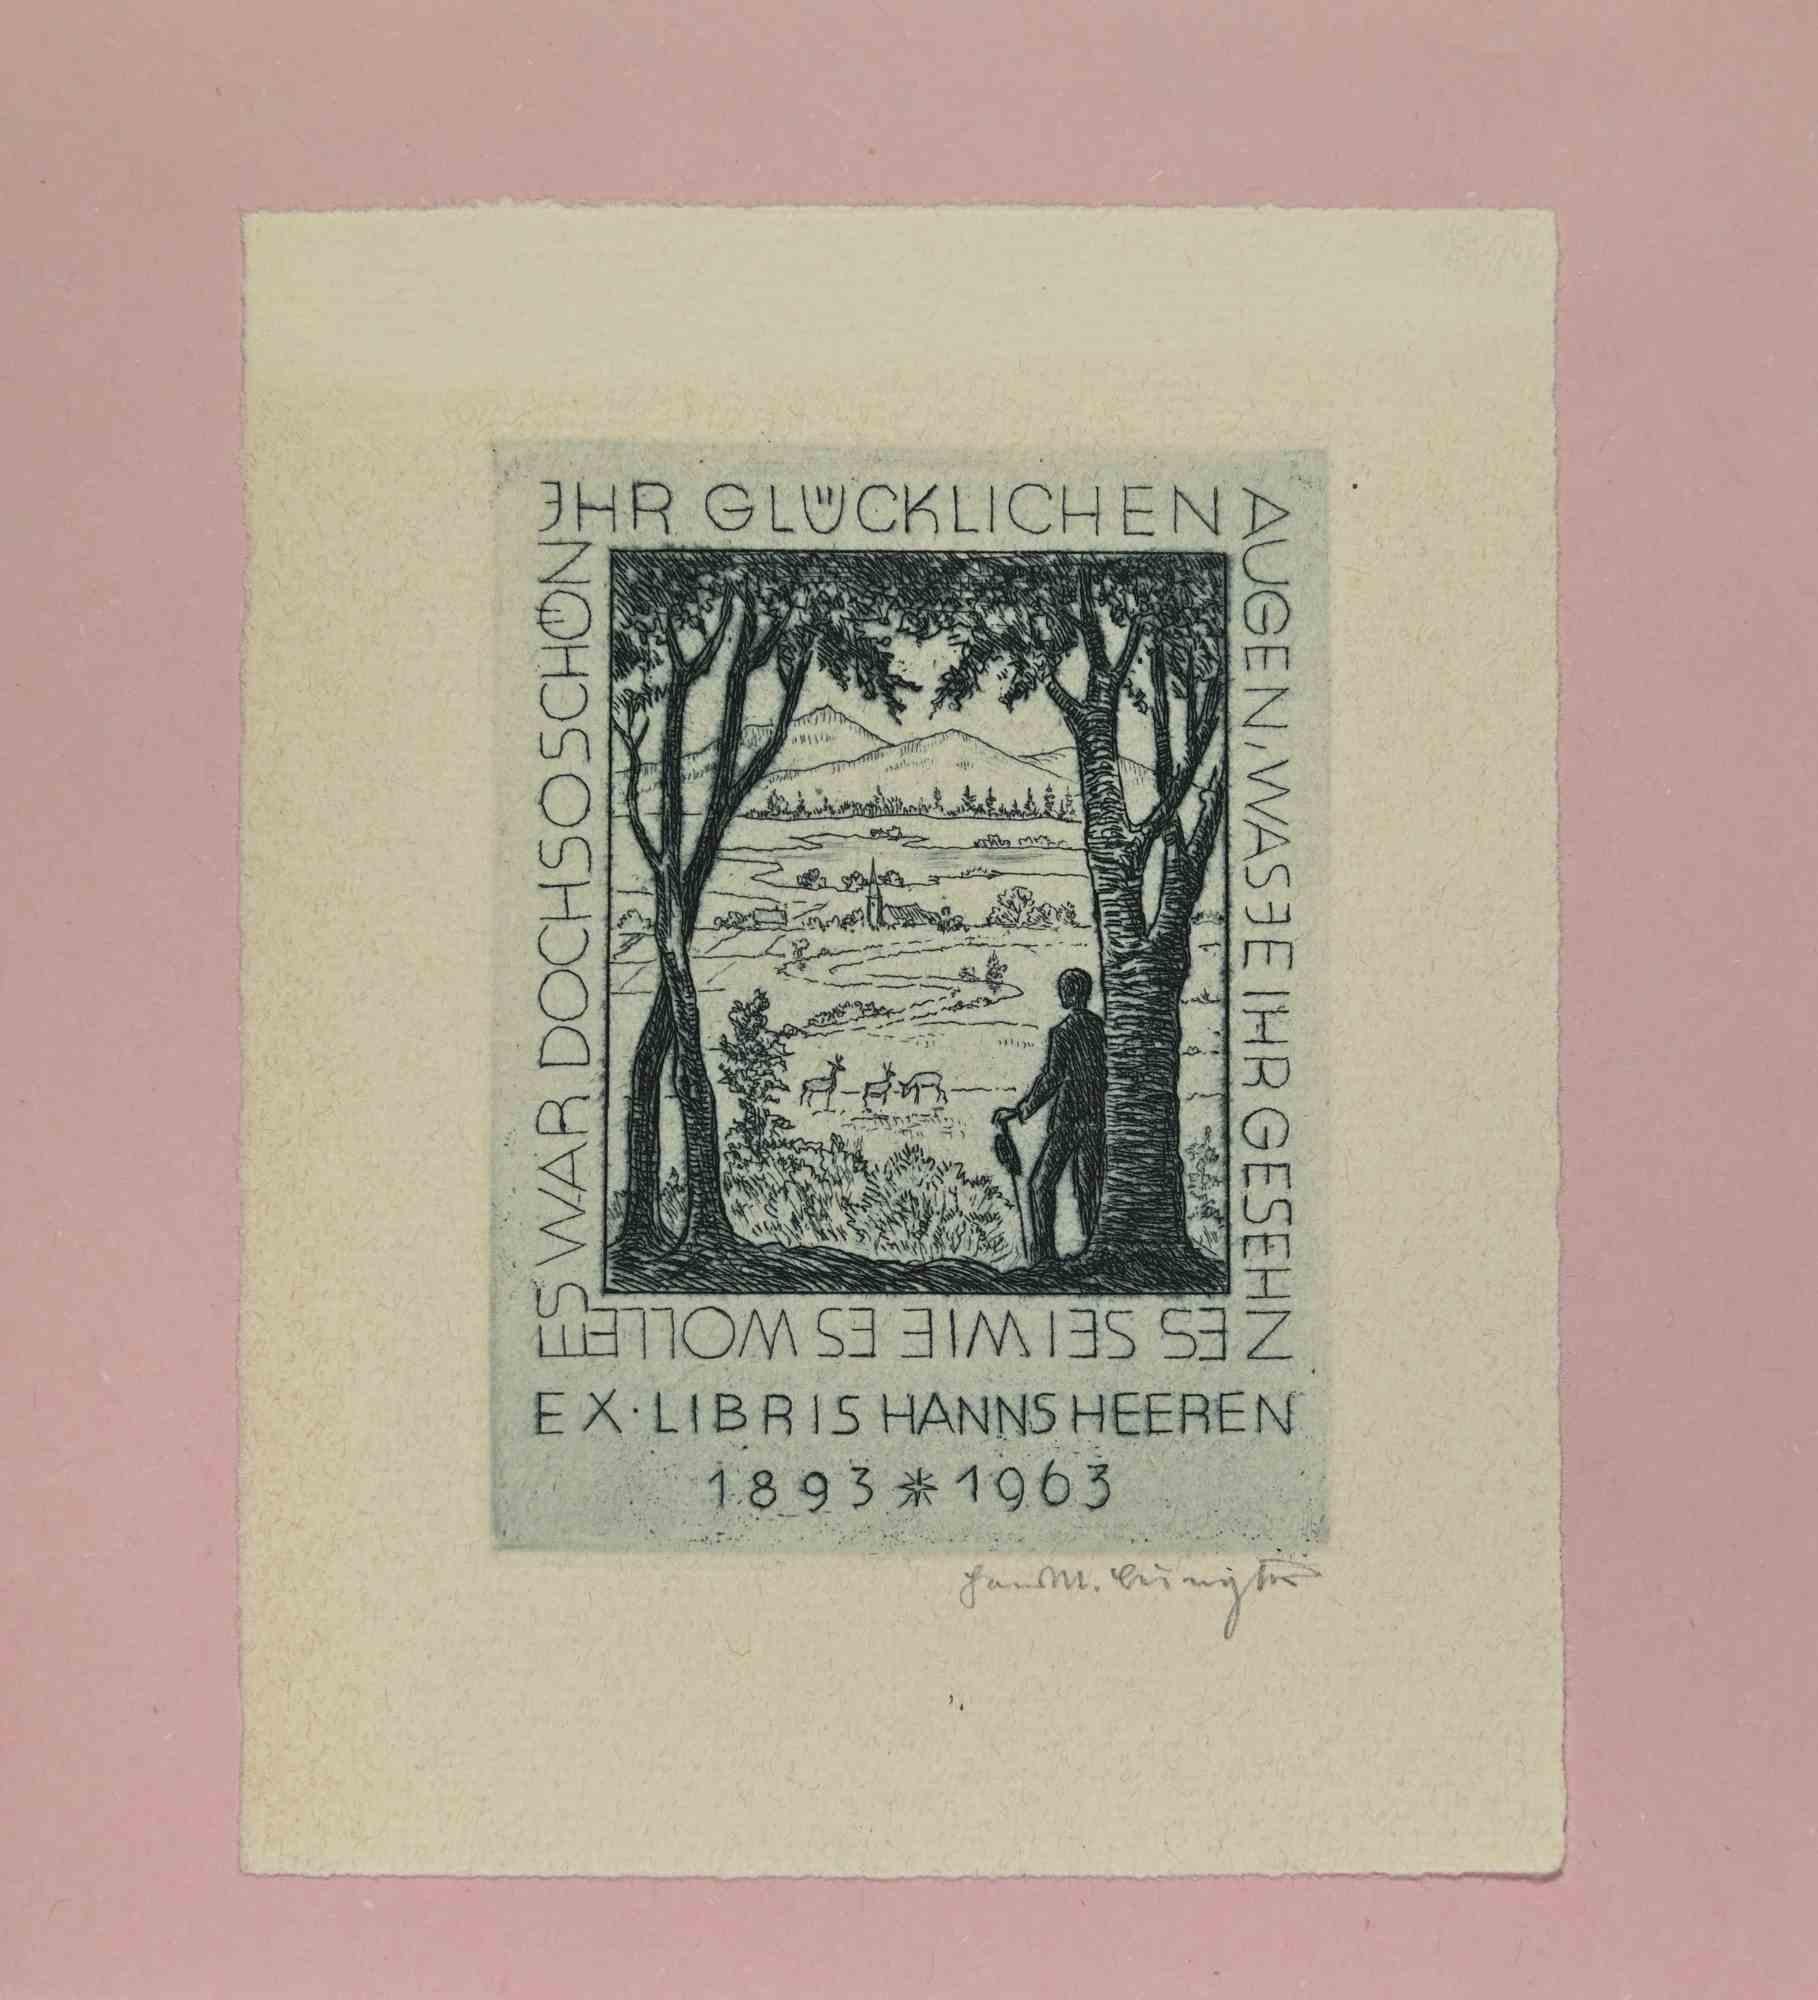 Ex Libris - Hanns Heeren 1893-1963 is an Artwork realized in Early 20th Century, by Hans Michael Bungter from Germany. 

Etching on ivory paper.  Hand Signed on the right corner. Signed on plate on back. The work is glued on pink cardboard.

Total